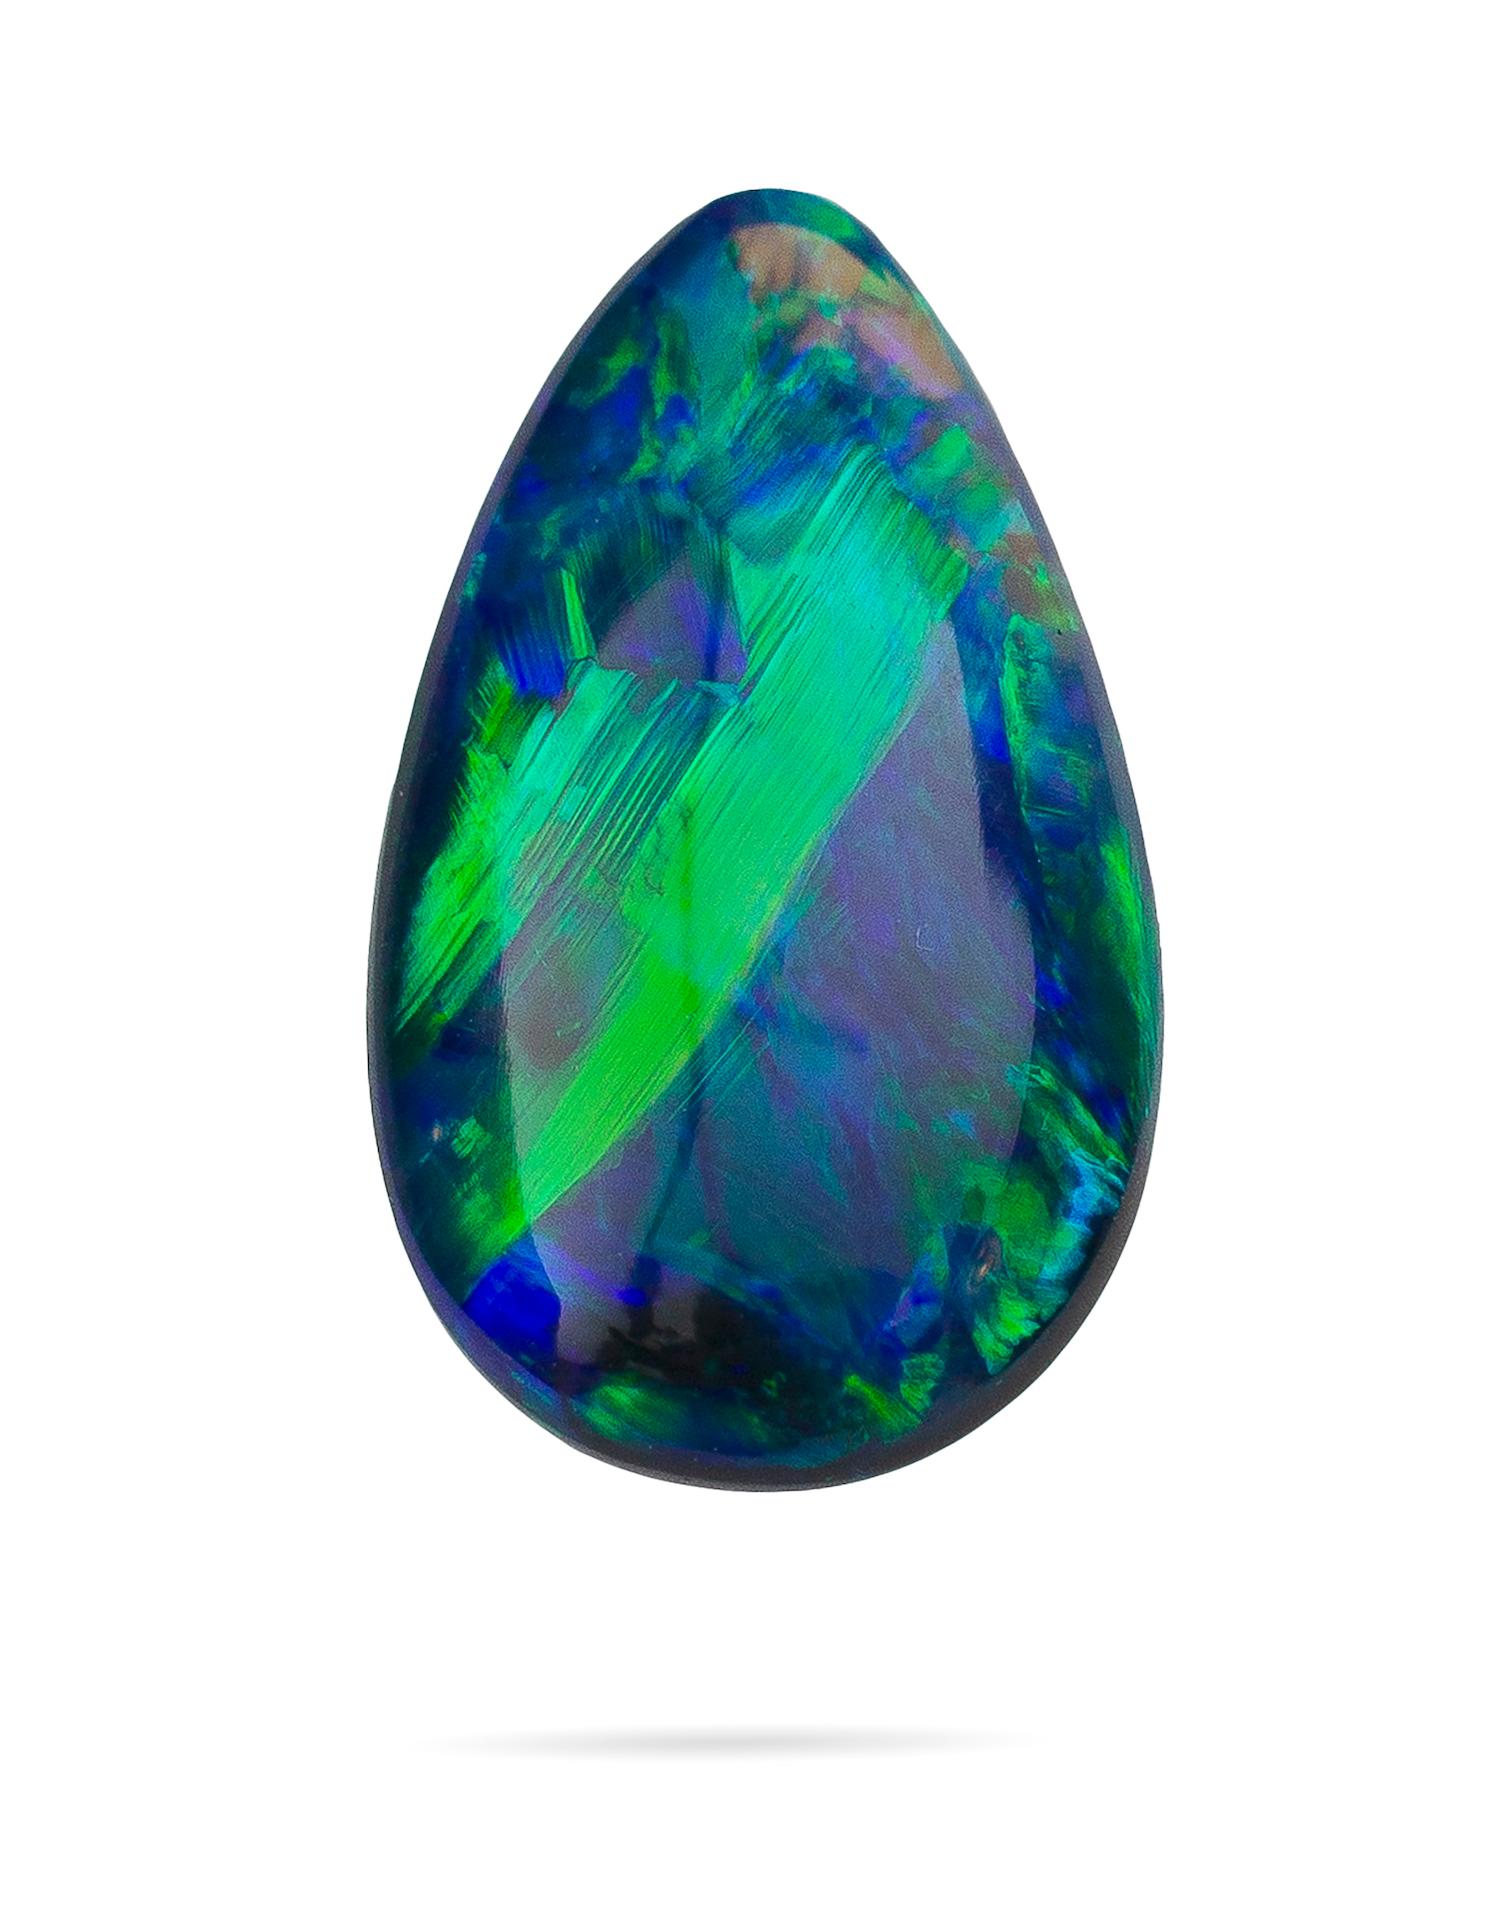 Australia is the birthplace of the most beautiful precious opal gemstones in the world. Fine Australian opals mesmerise with colours changing and shifting the gem moves with an unrivalled vibrancy.

This opal was ethically sourced from Lightning